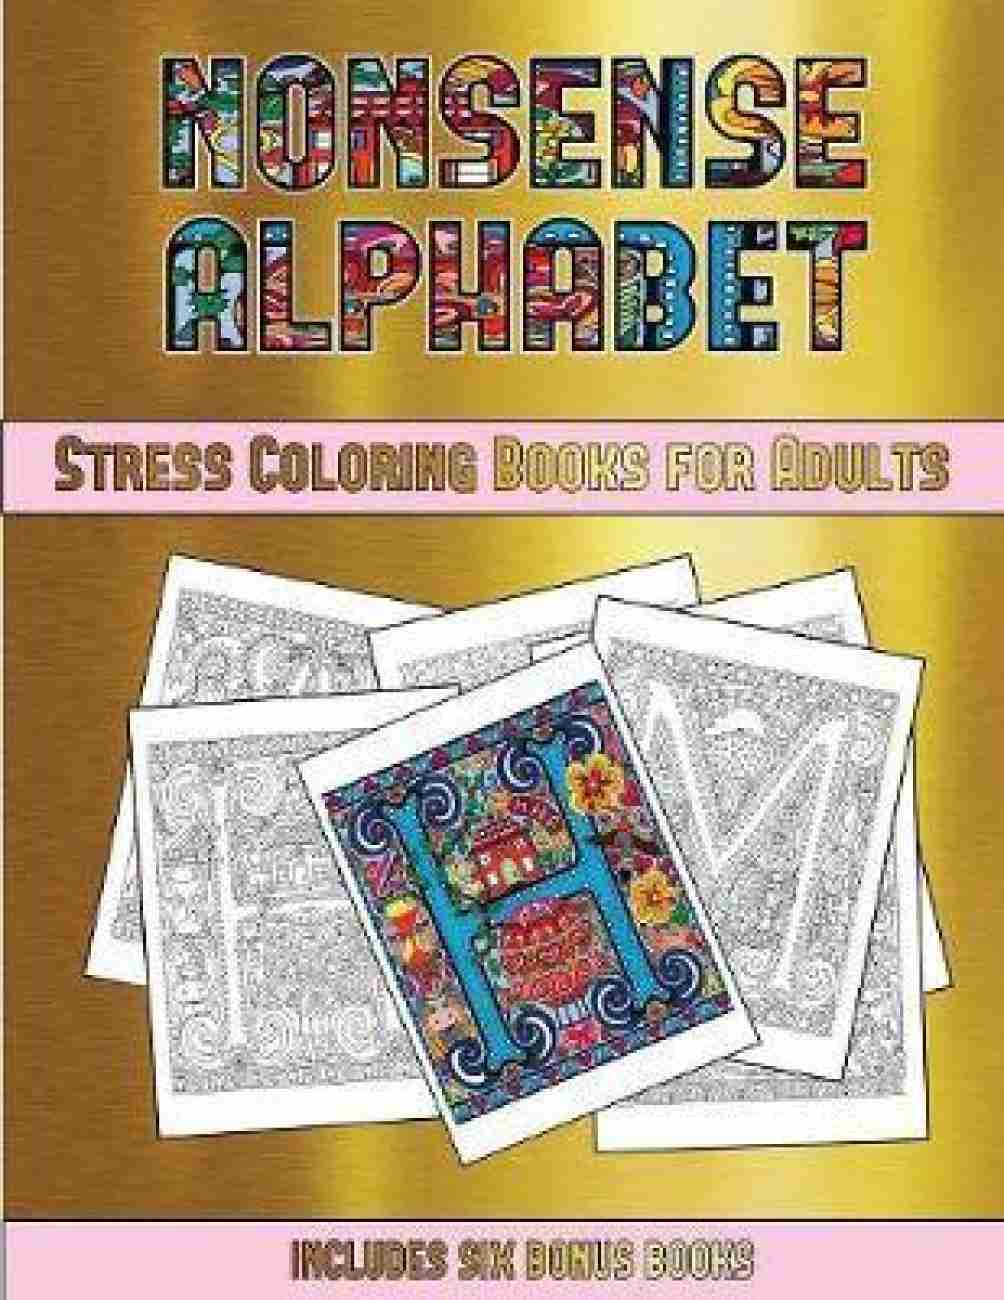 Stress Coloring Books for Adults (Nonsense Alphabet): Buy Stress Coloring  Books for Adults (Nonsense Alphabet) by Manning James at Low Price in India